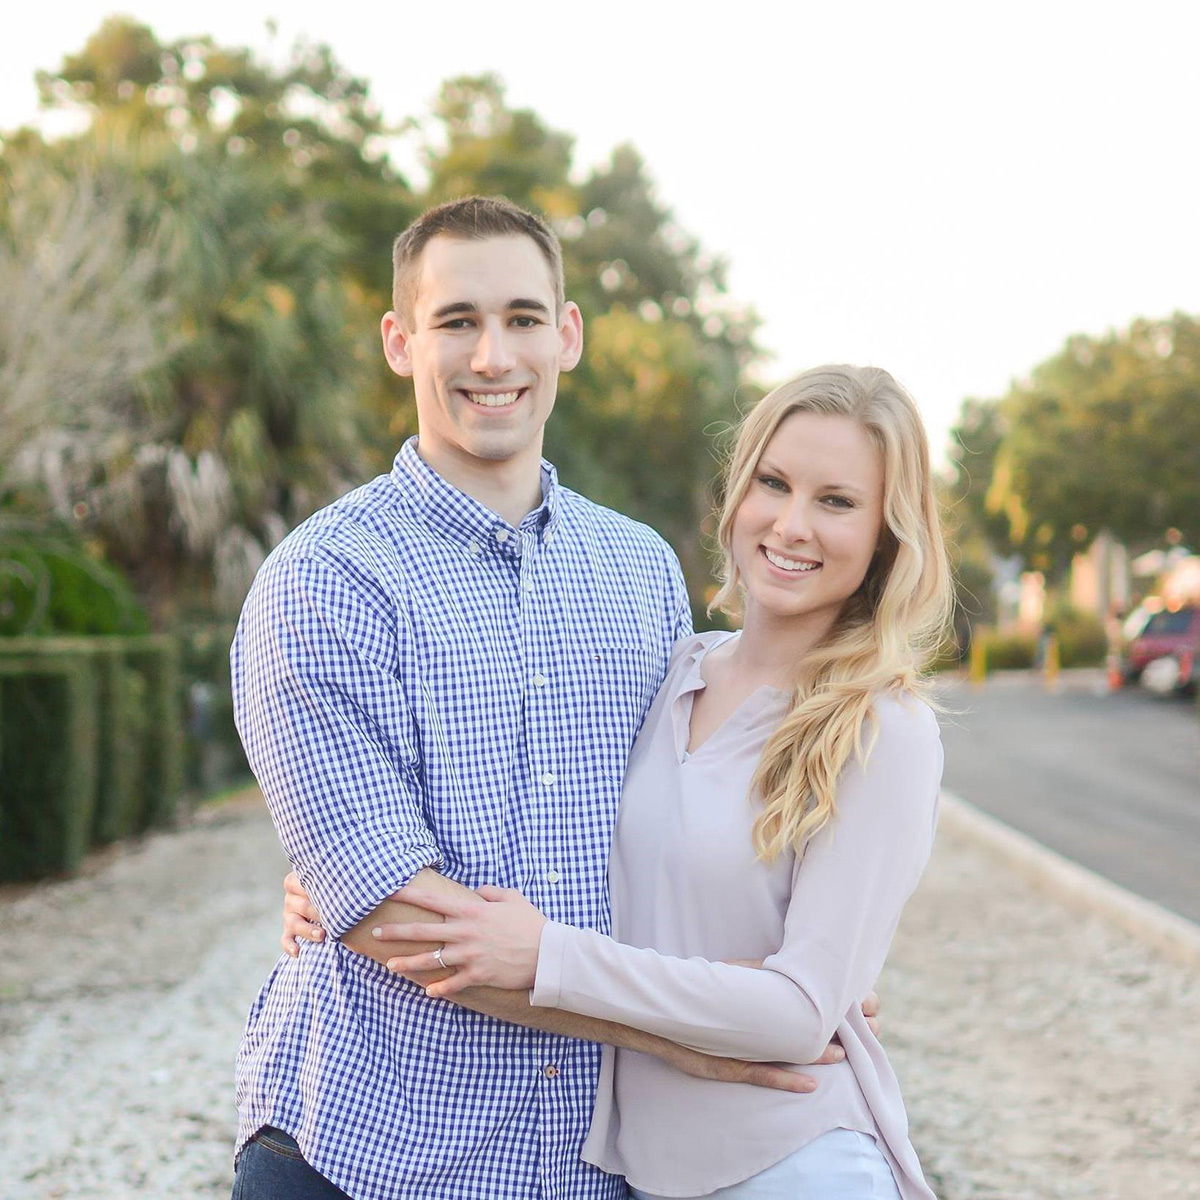 Megan and Andrew Nelson are both graduates of UCF’s School of Teacher Education. Photo Credit: The Heims Photography